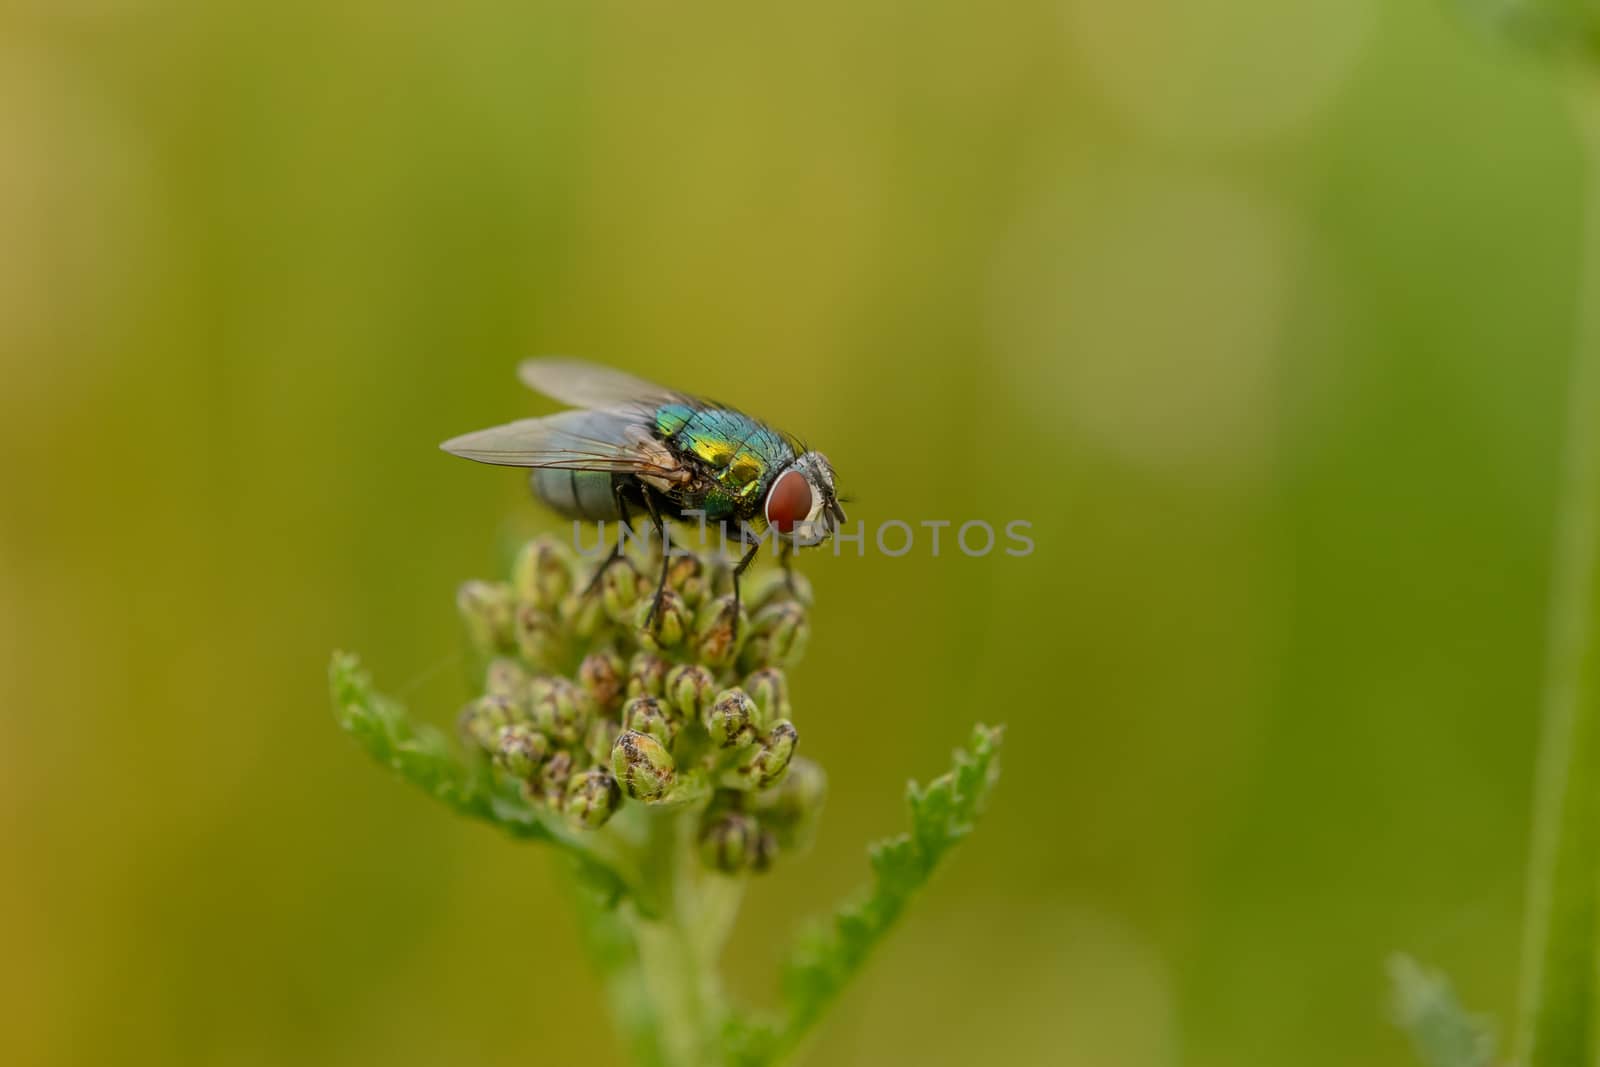 Closeup macro of a fly resting on top of a flower stem